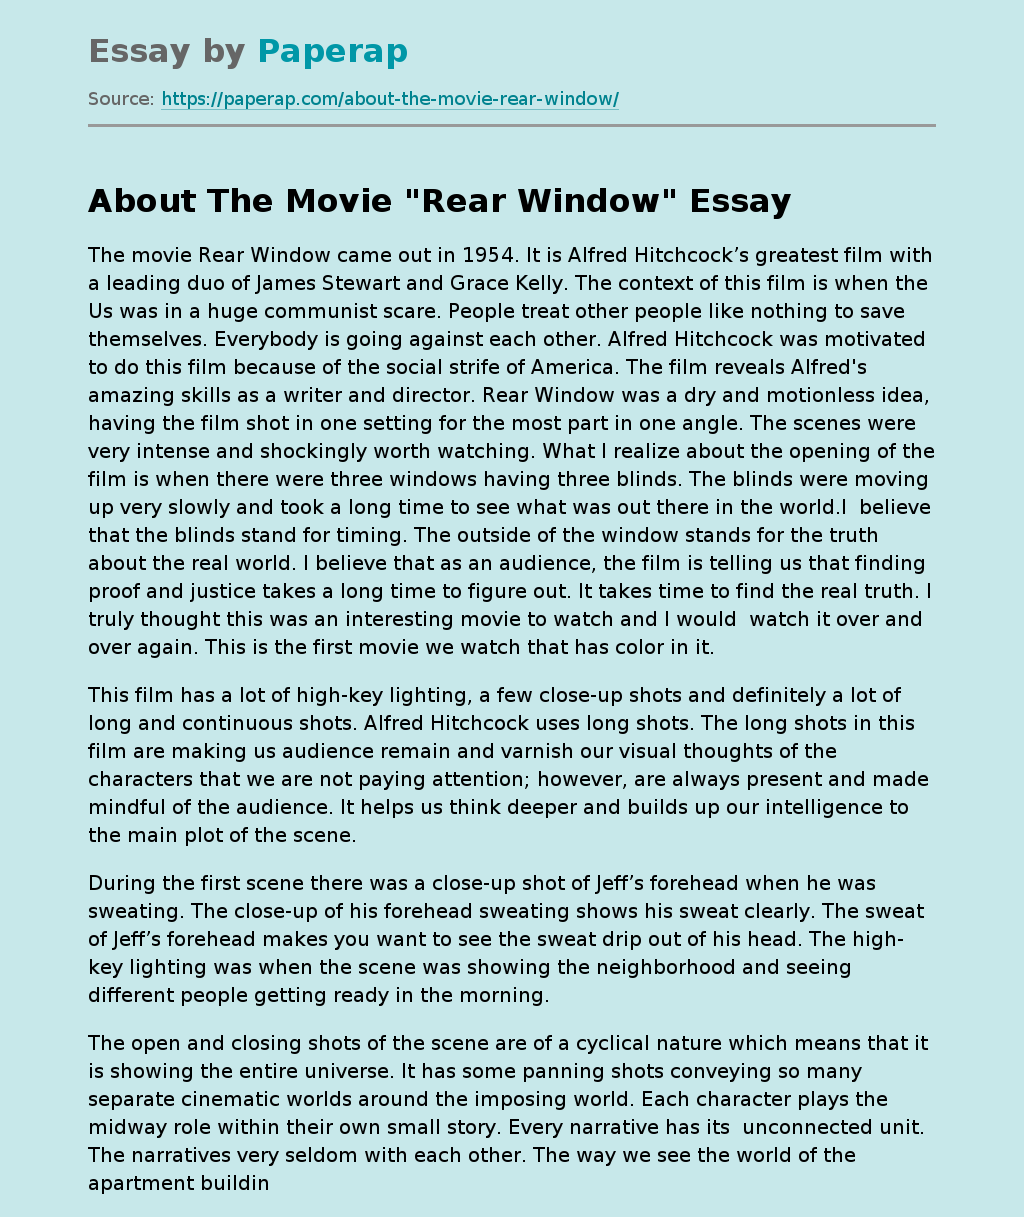 About The Movie "Rear Window"